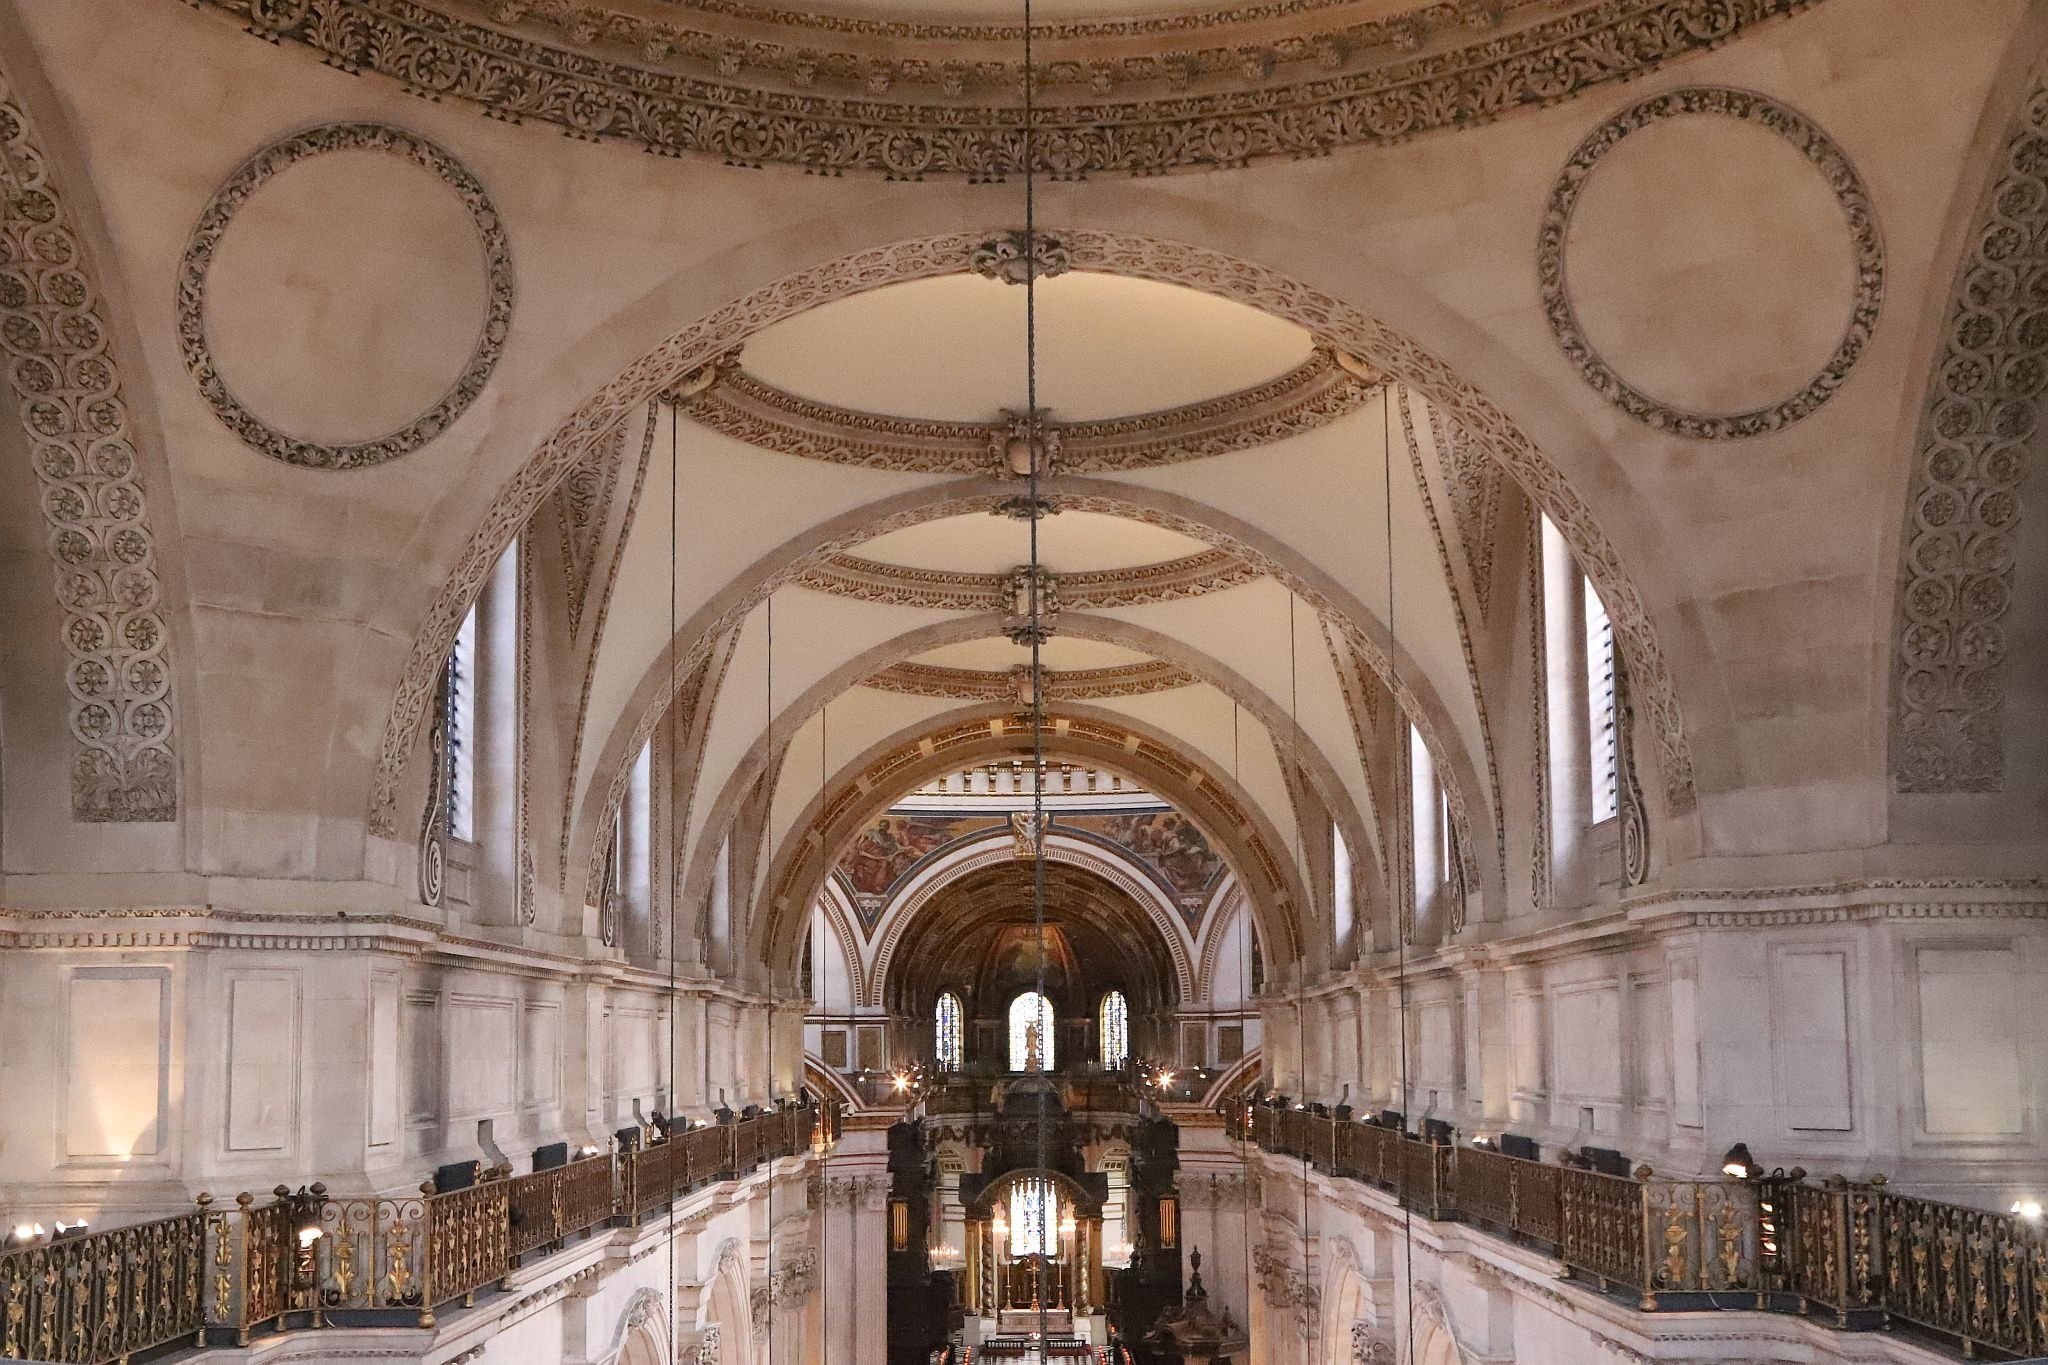 View down the nave from the balcony above the Great West Doors. St. Paul's Cathedral Triforium Tour, 09-Jan-2023.